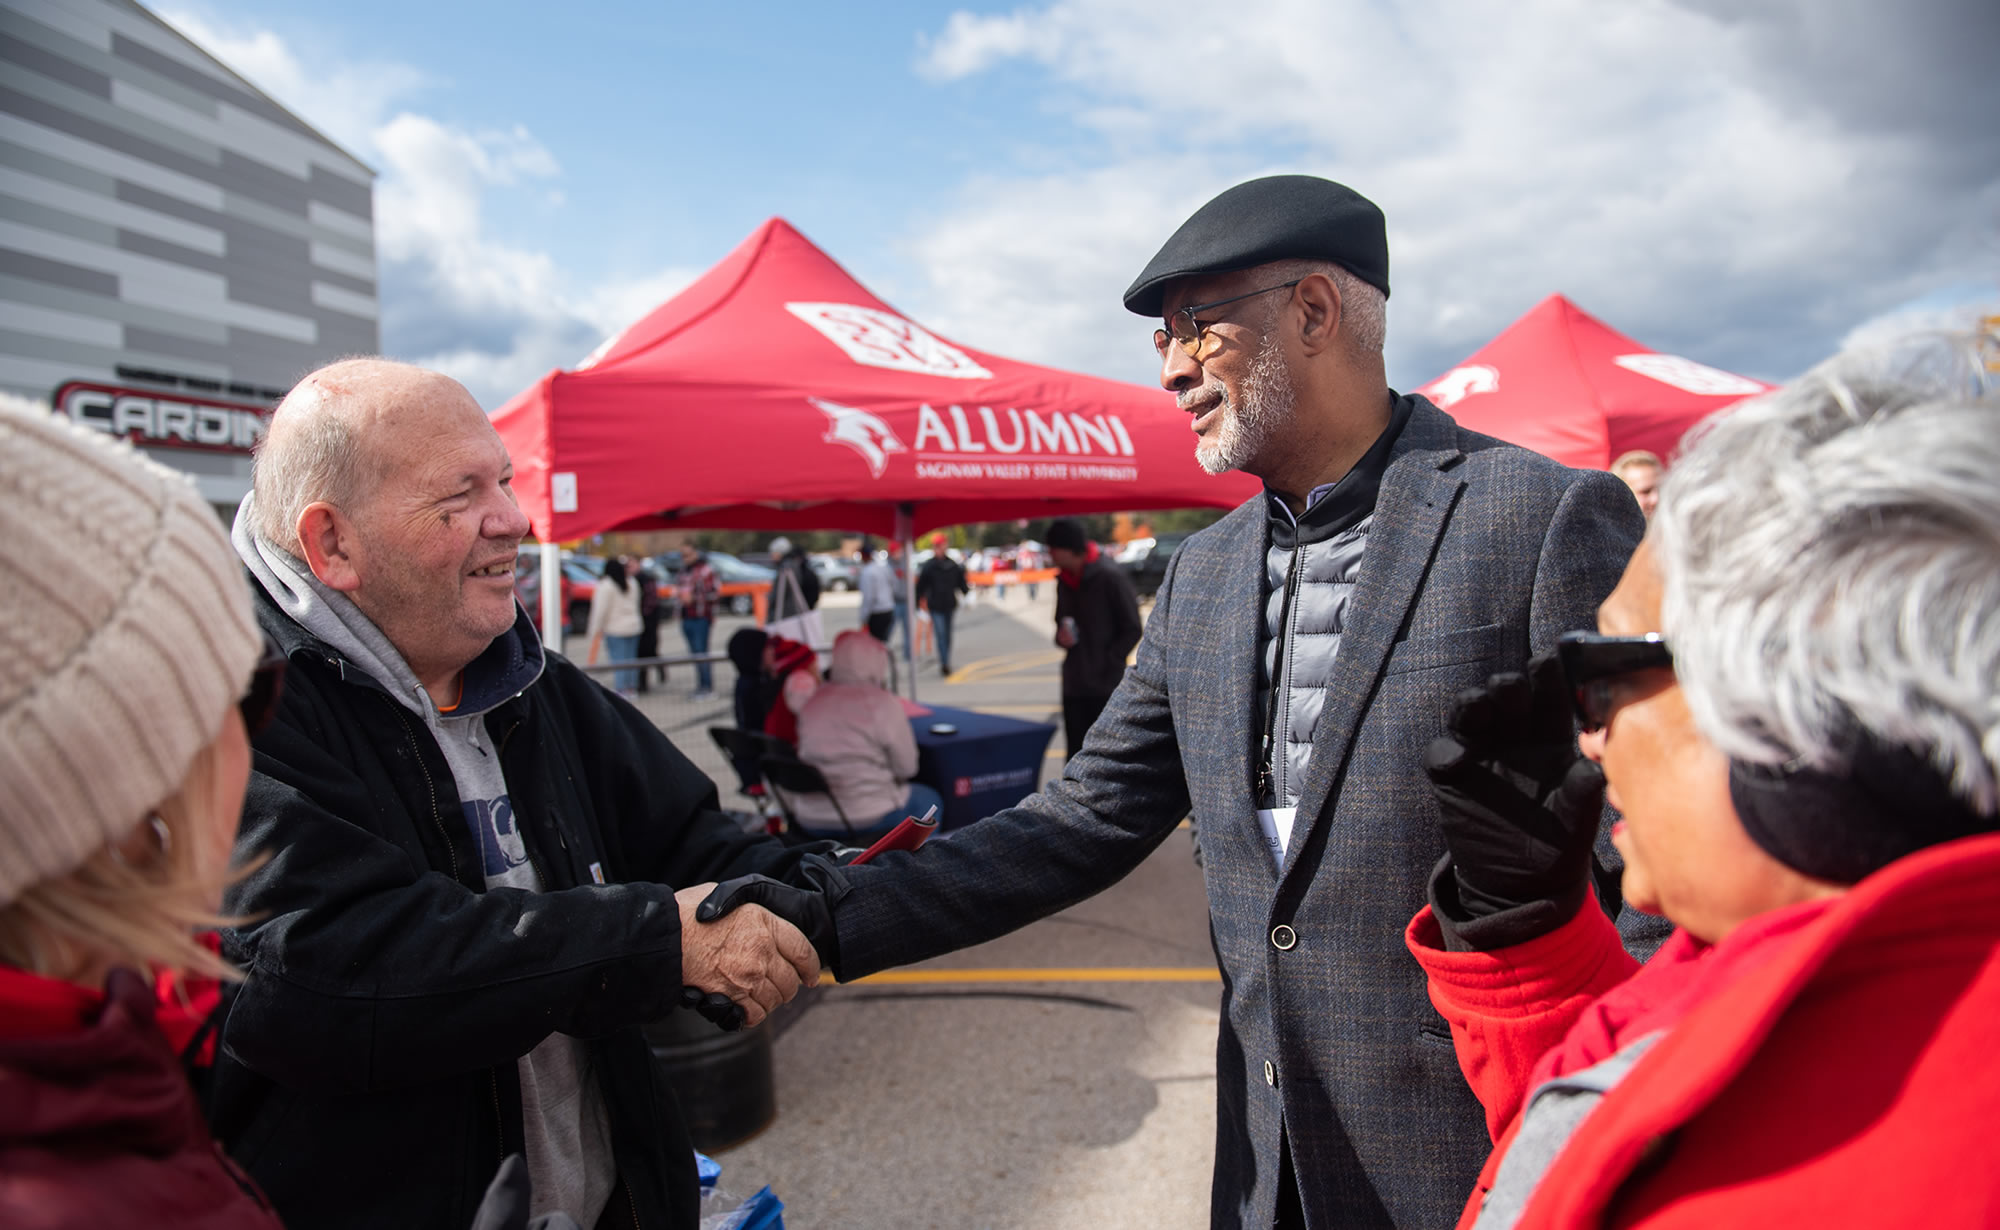 George Grant meeting with Alumni at football game